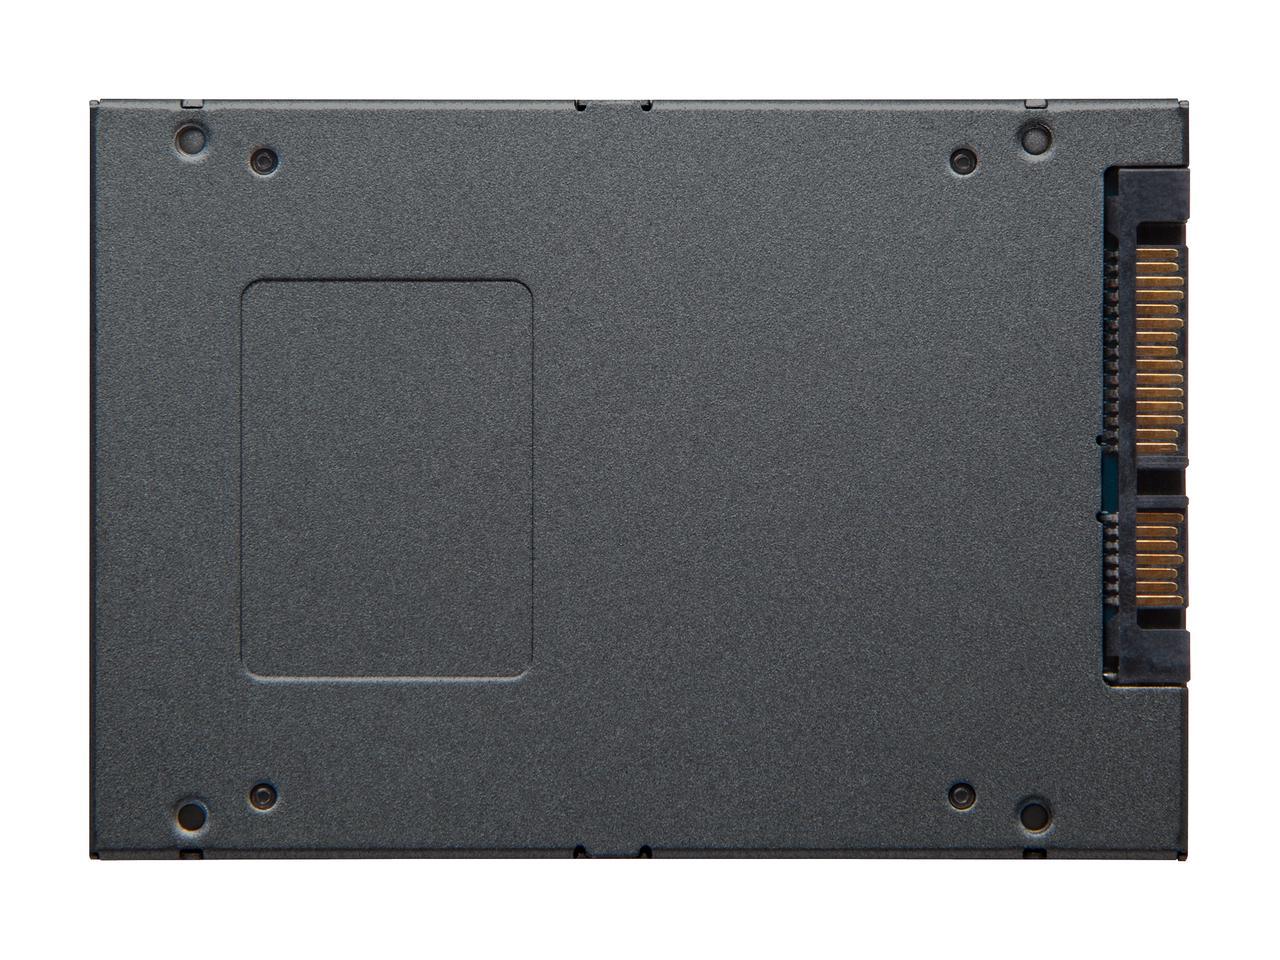 CES Kingston A400 SSD Becomes The New Entry-Level SATA Drive - Legit Reviews